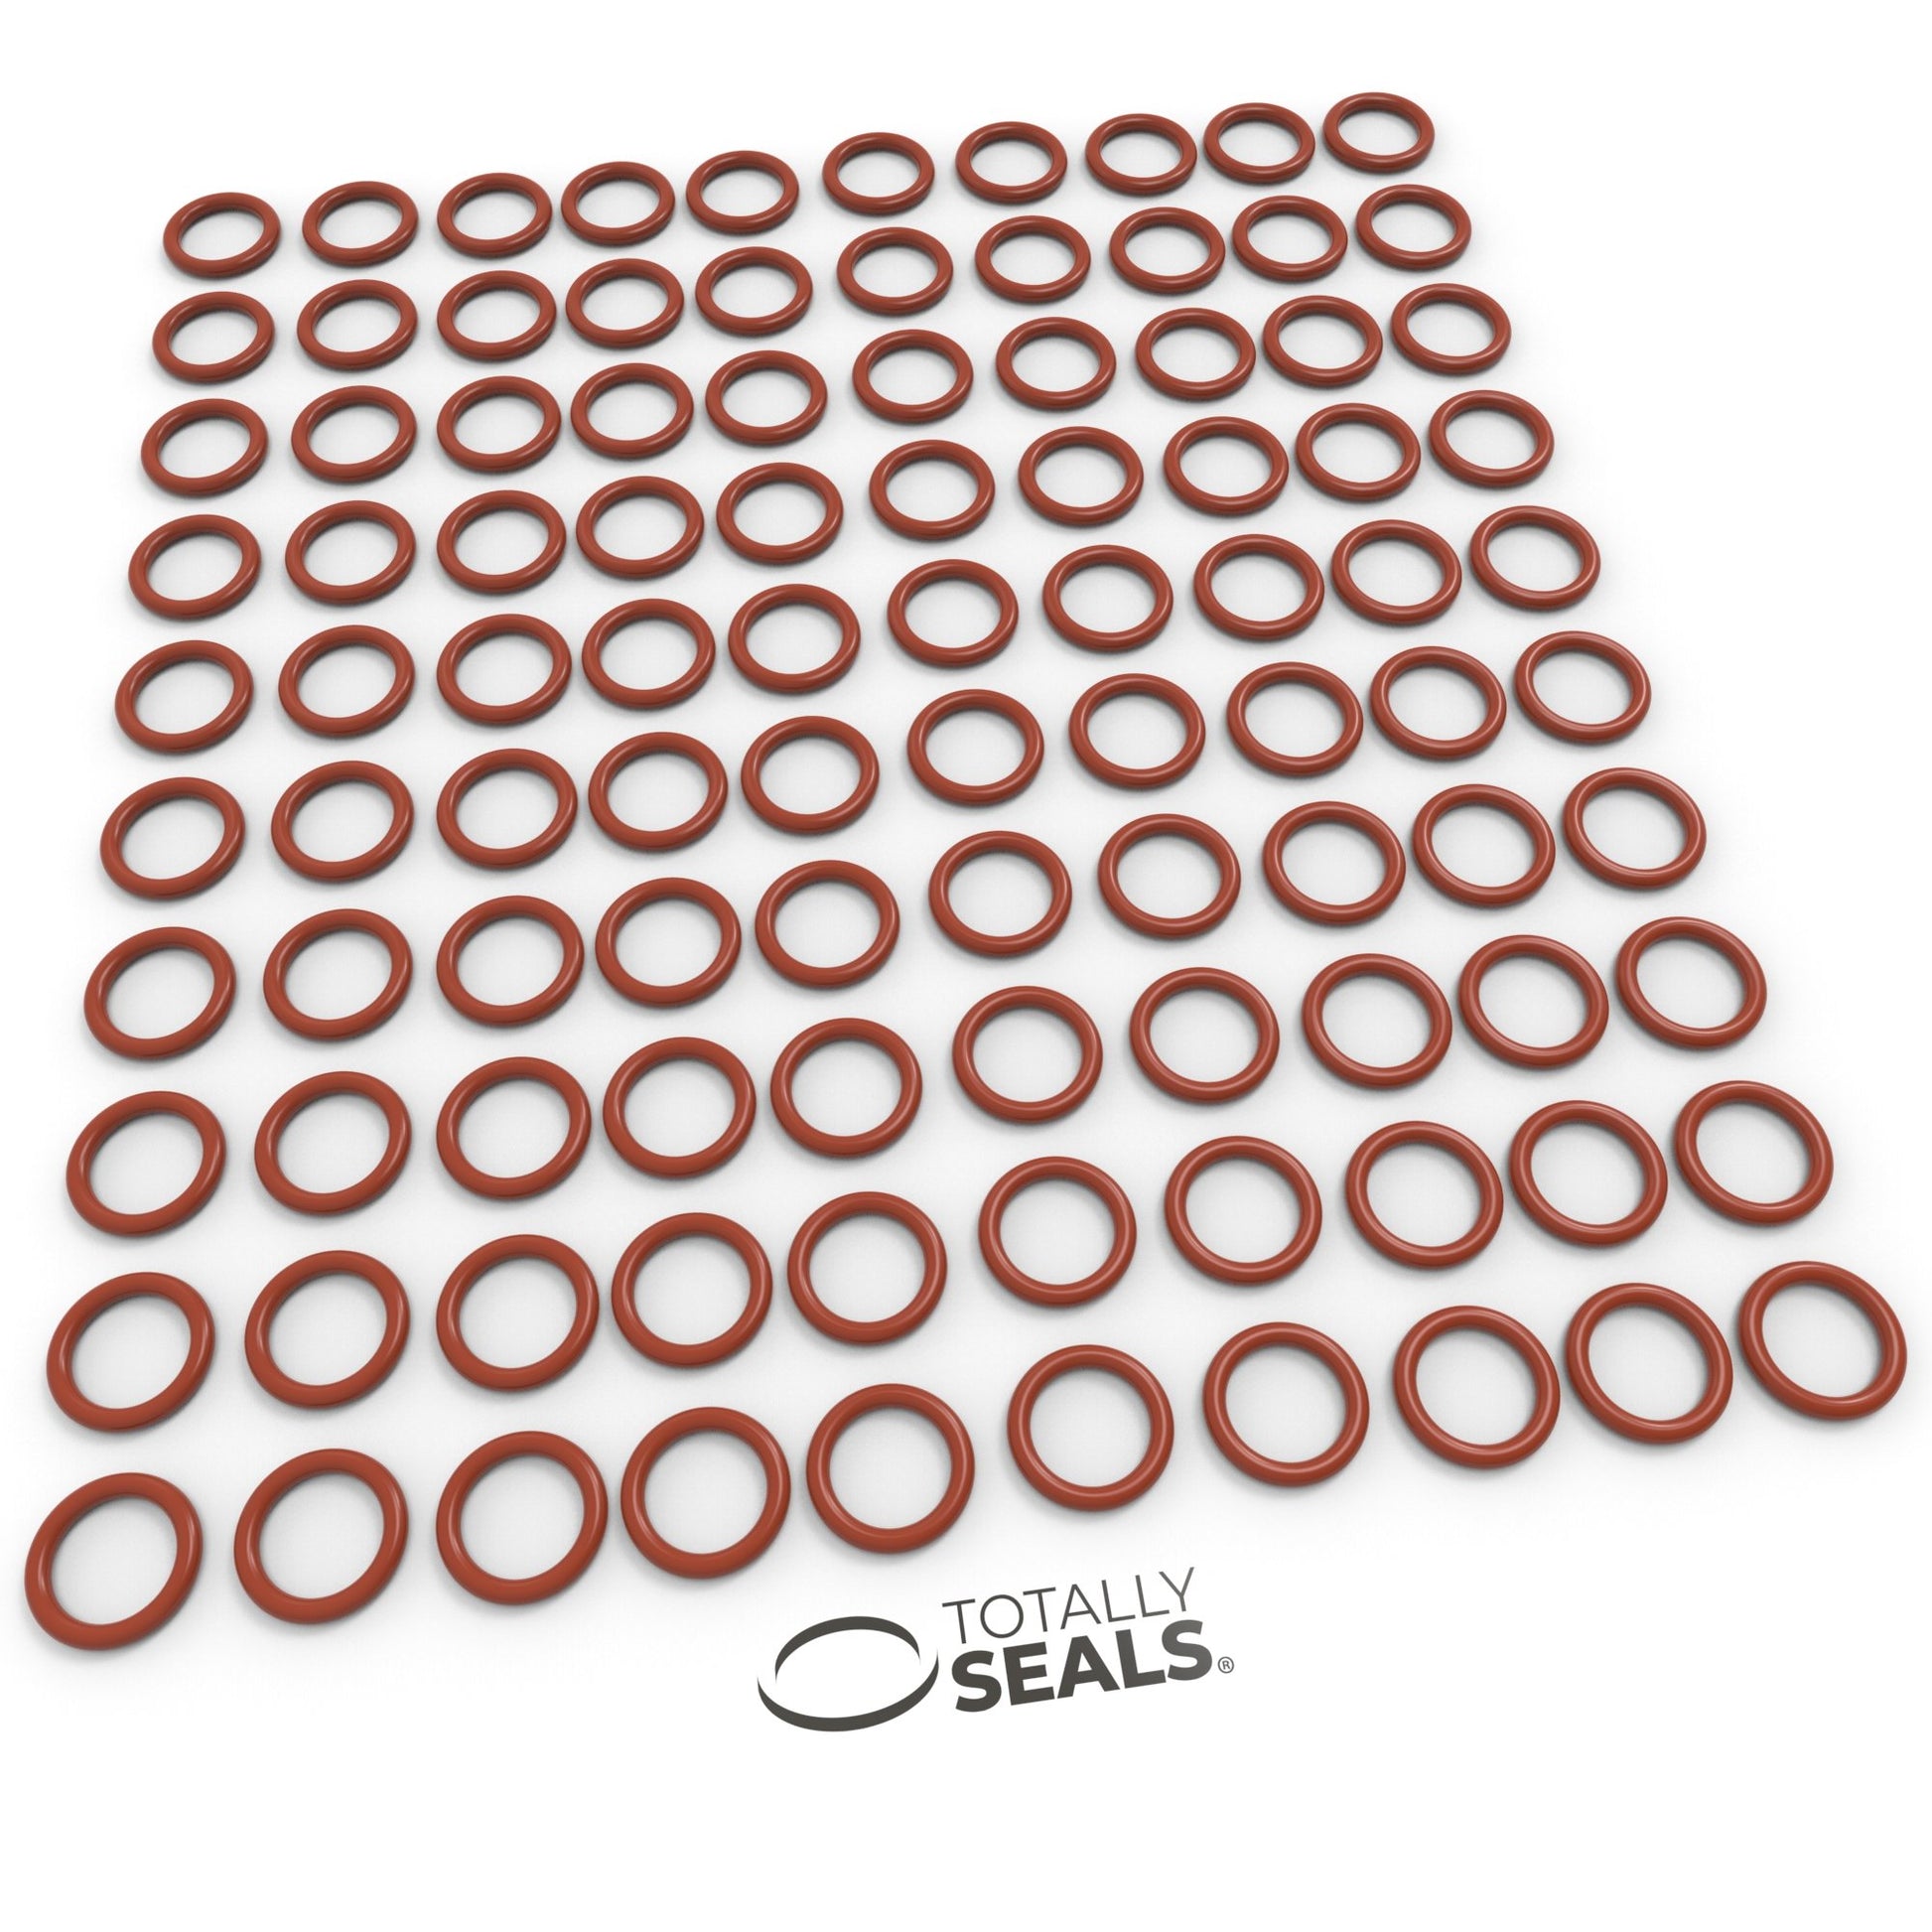 11mm x 3mm (17mm OD) Silicone O-Rings - Totally Seals®